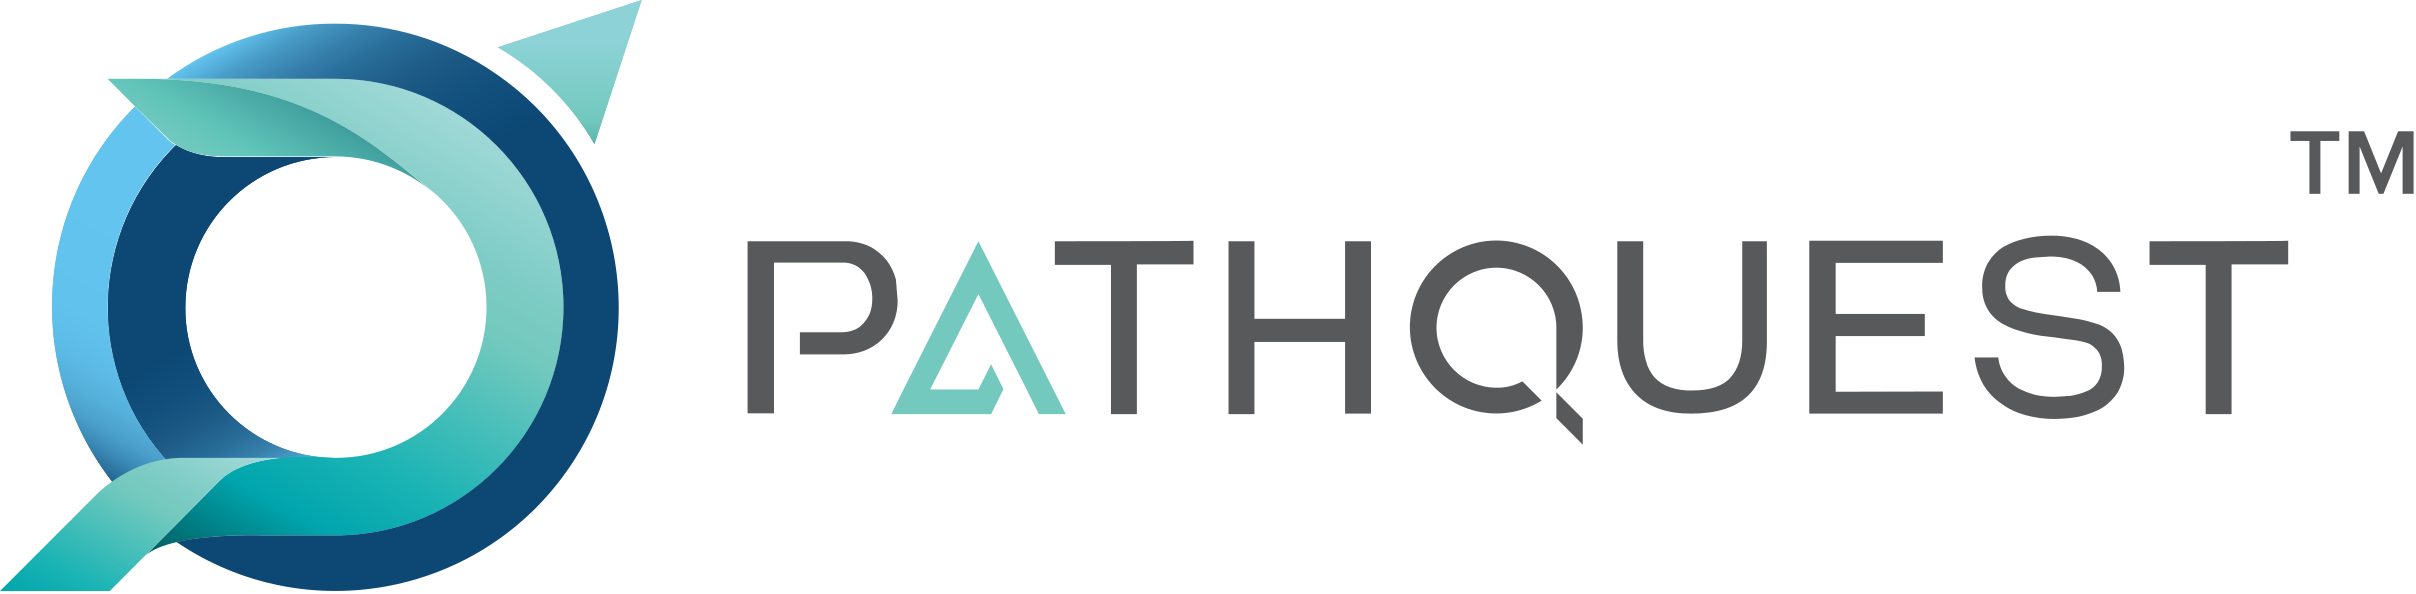 Business logo of Pathquest